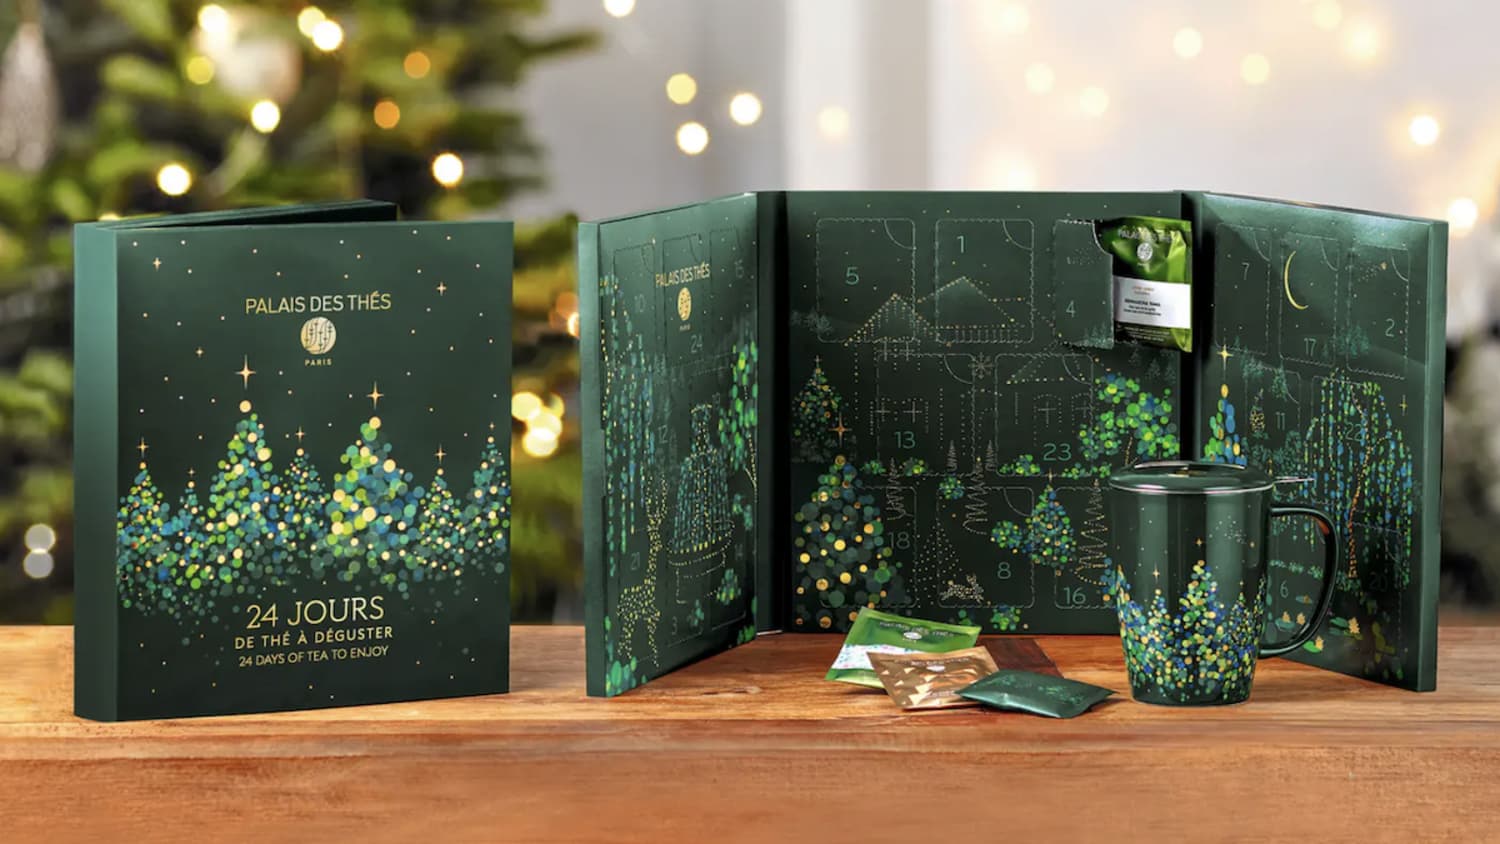 8 best beauty advent calendars in 2020 to countdown to Christmas with